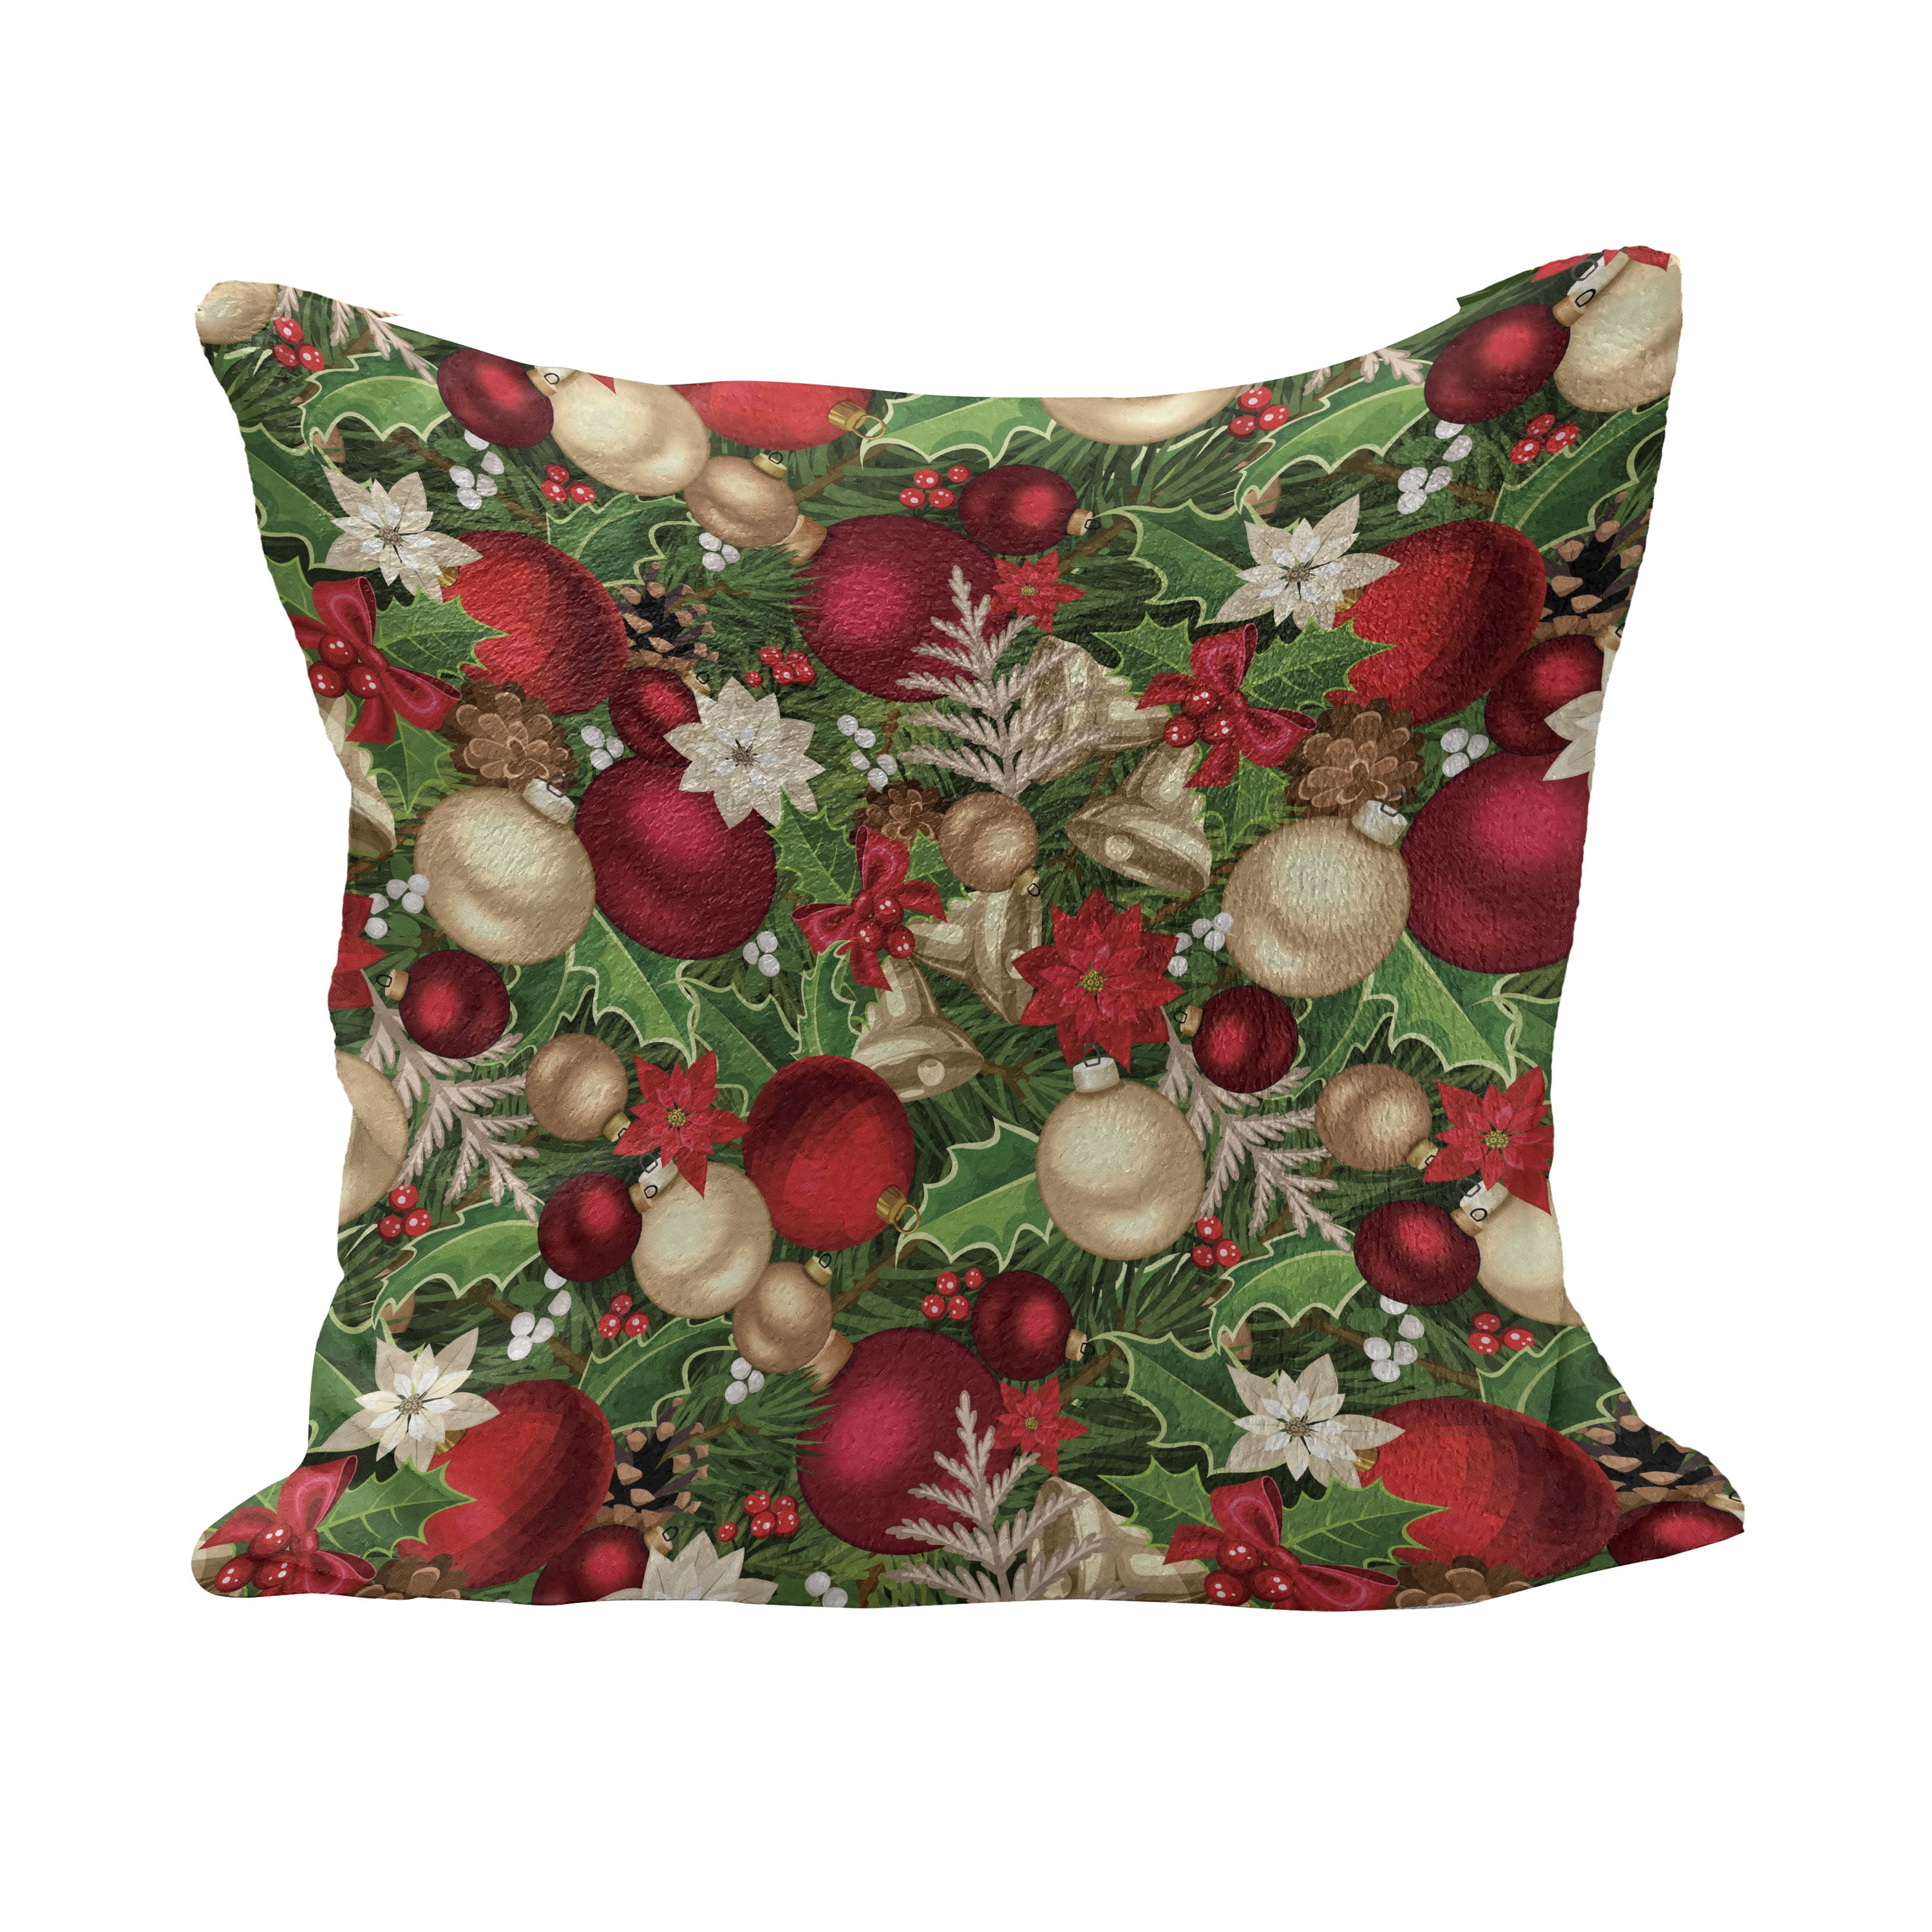 Christmas elk Pillow covers,Red Throw Pillow Cases，16 x 16，18 x 18，20 x 20，24 x 24，Square Decorative Cushion Cover，Christmas decor，Home gift